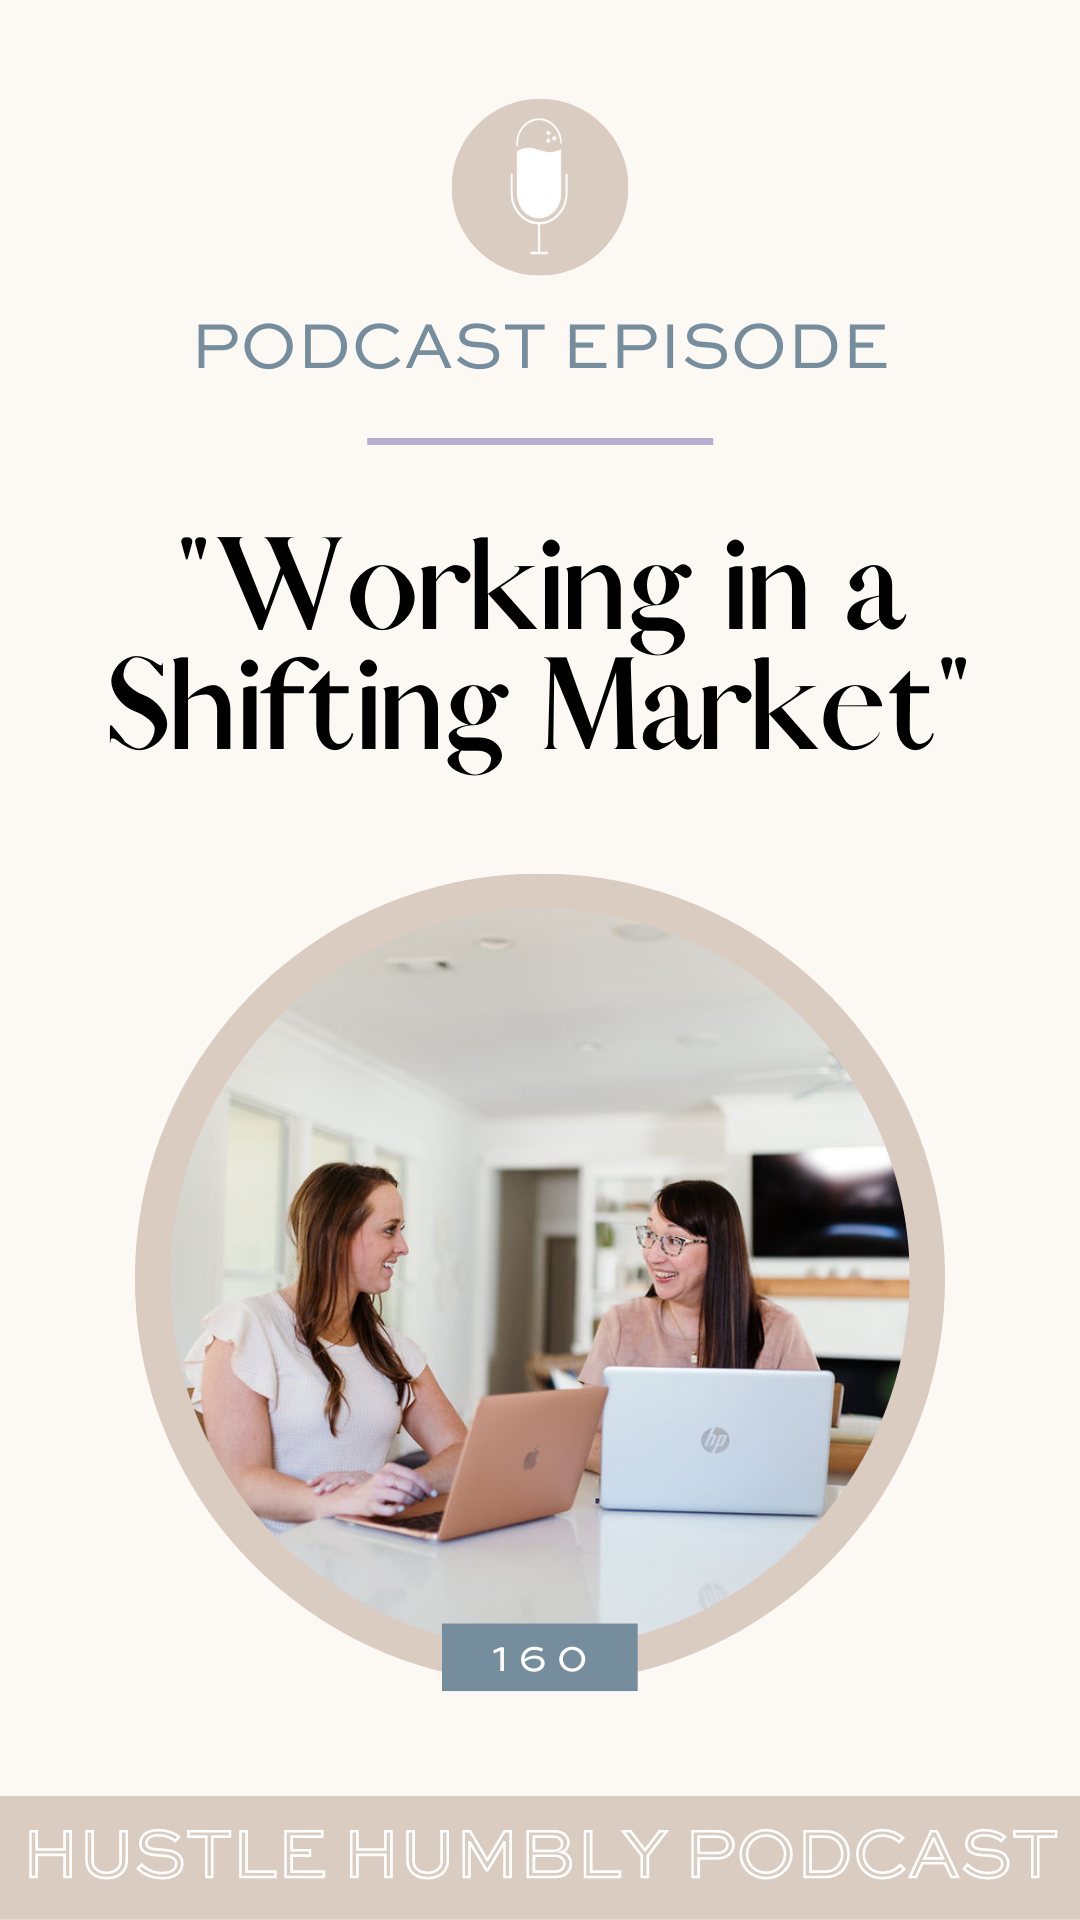 Hustle Humbly Podcast Episode 160: Working in a Shifting Market